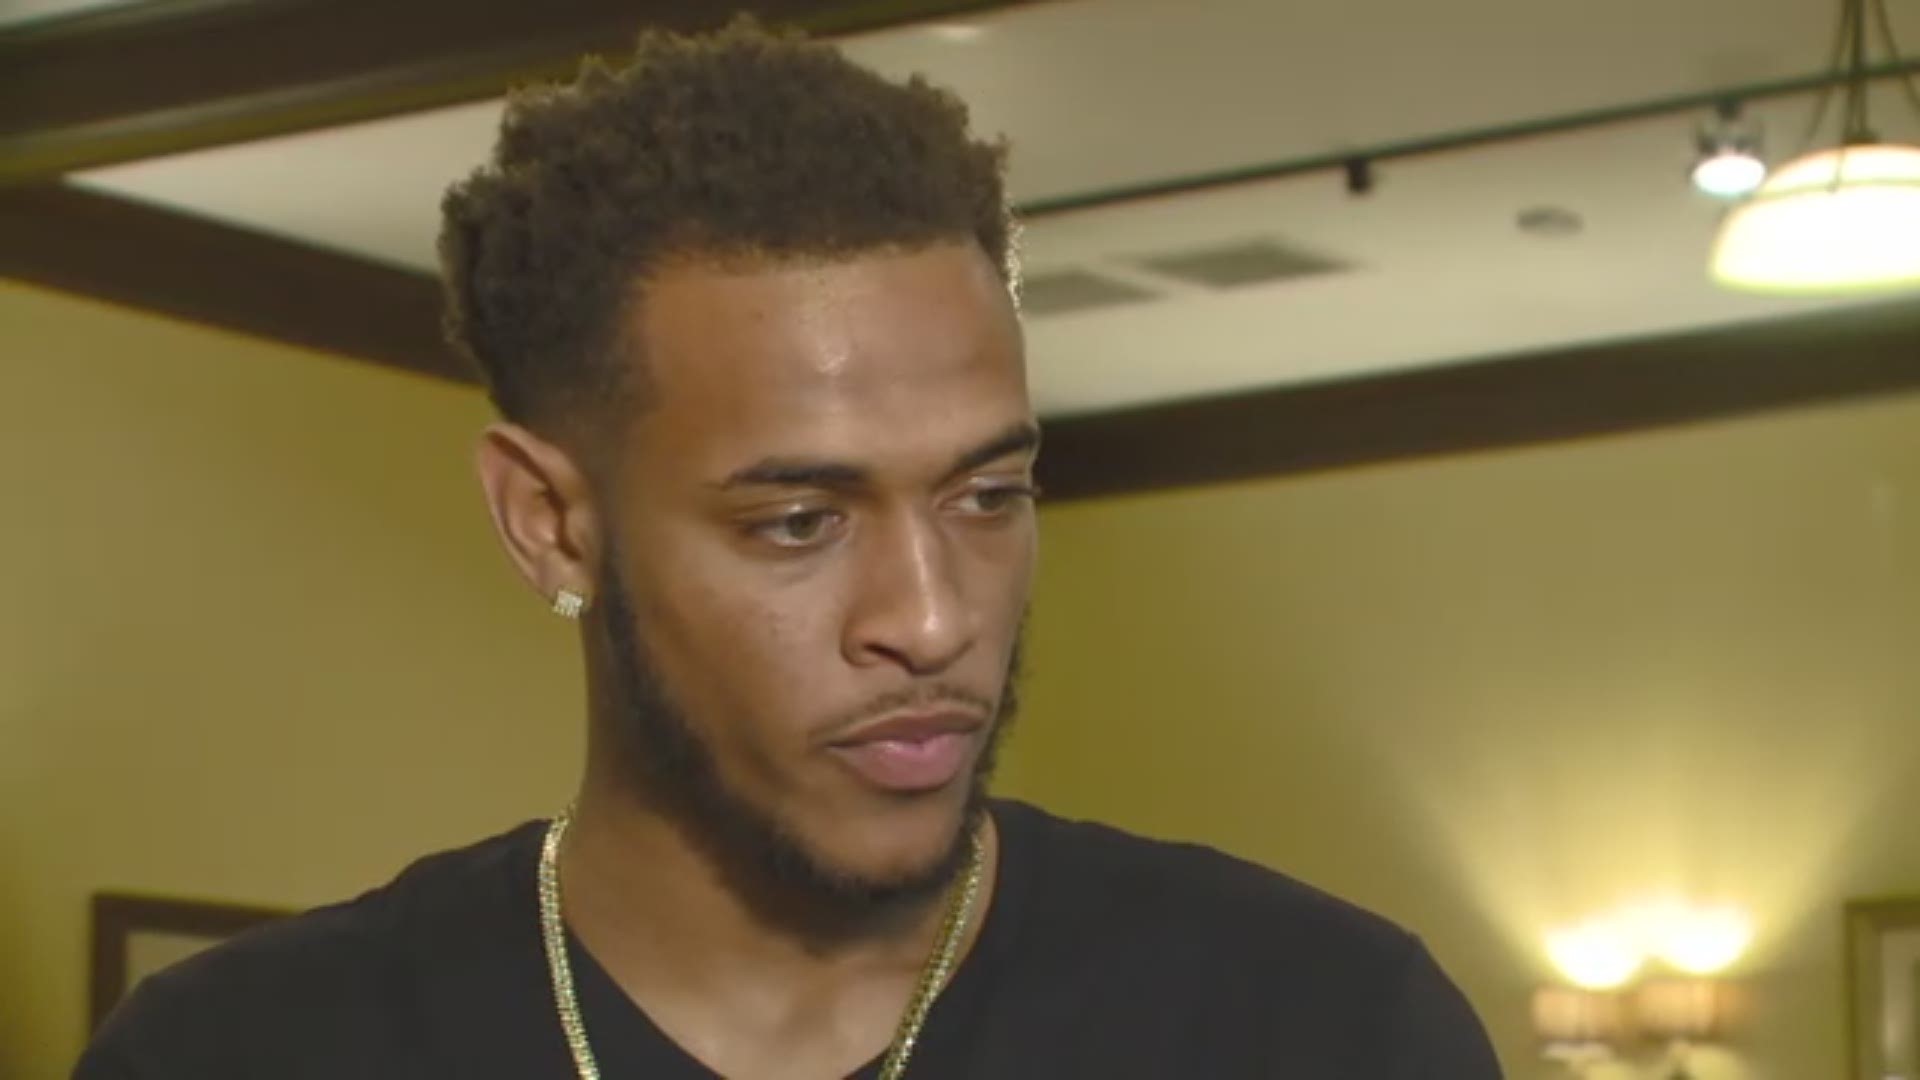 THV11's Dorian Craft was at Gafford's NBA Draft watch party and spoke to him about his experience from the NBA Combine to draft night and how meaningful draft night is.